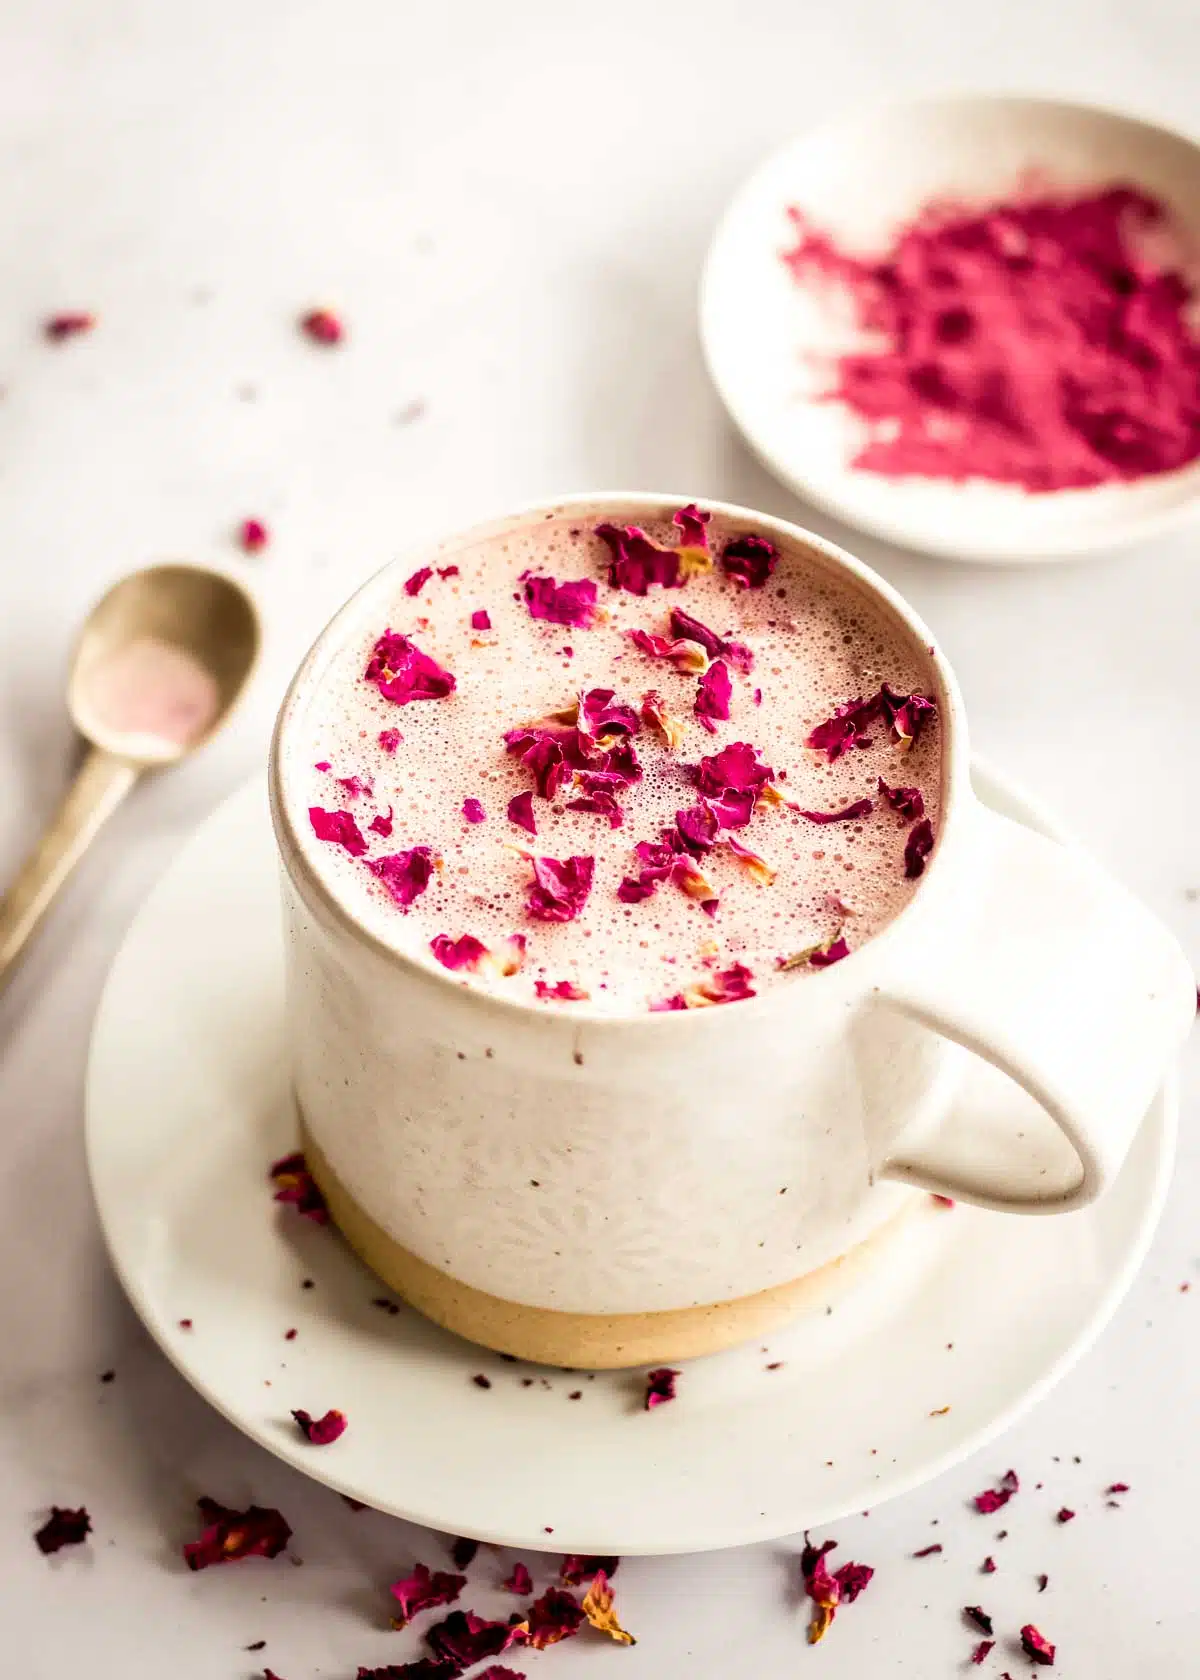 A cream coloured mug of rose latte sits on a saucer on a white marble table, decorated with pink rose petals. A dish of beet powder and a spoon sit in the background.